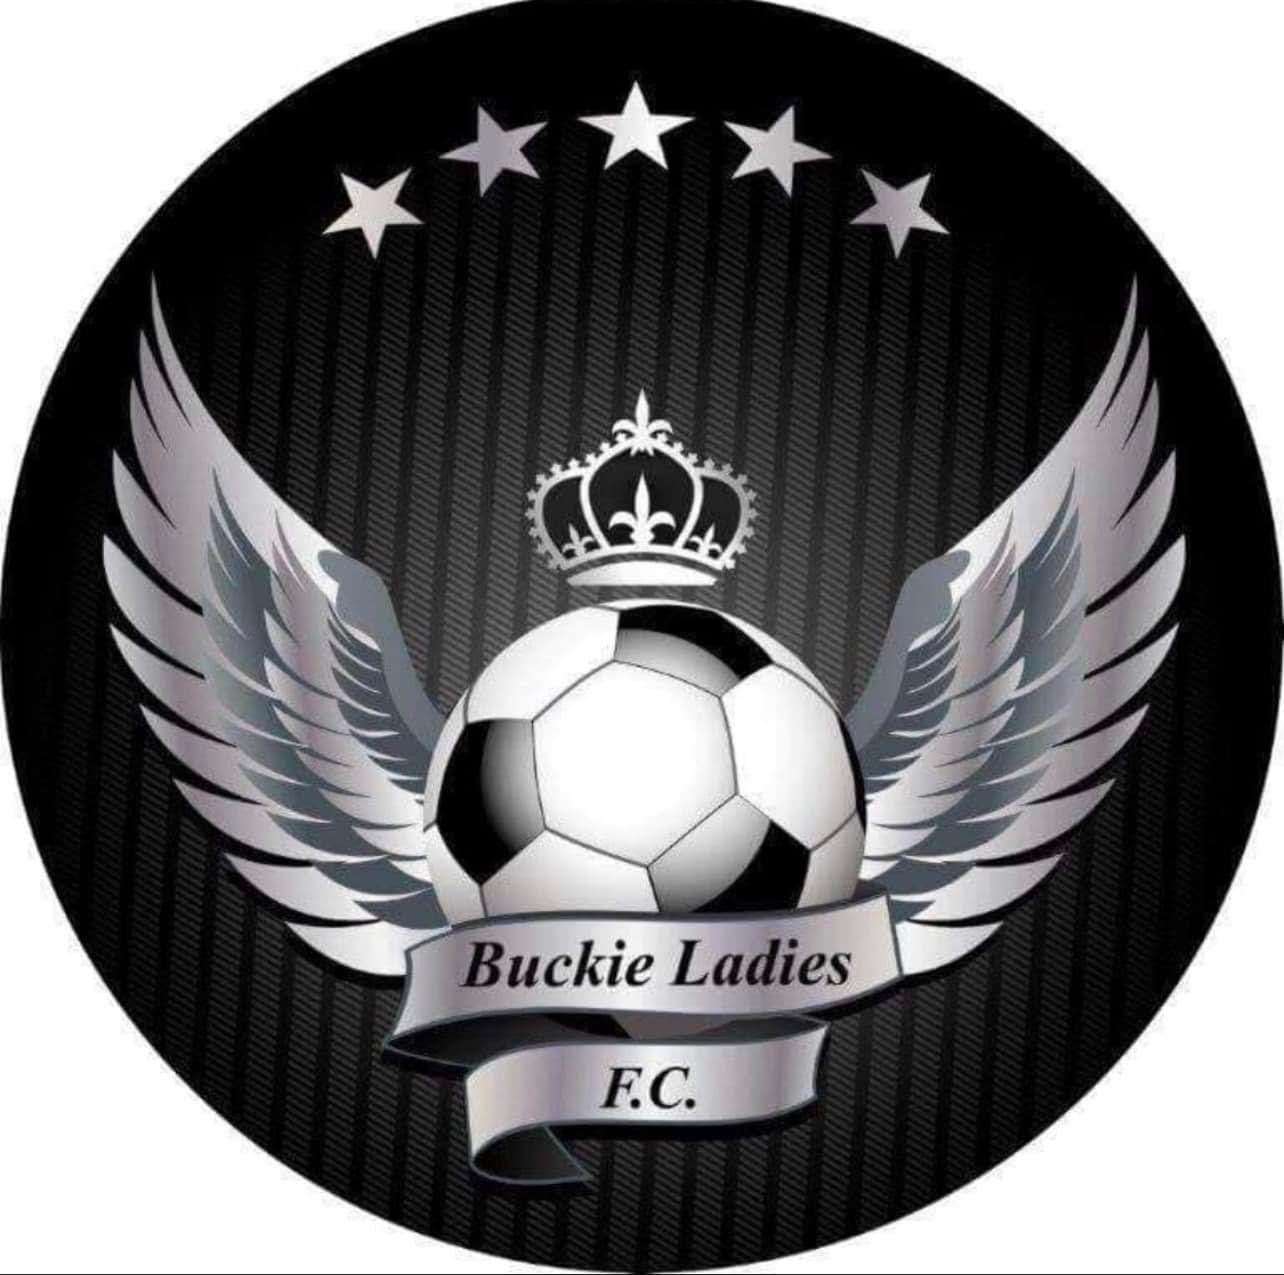 Buckie Ladies will now be facing Caley at the all-weather pitch on Sunday.